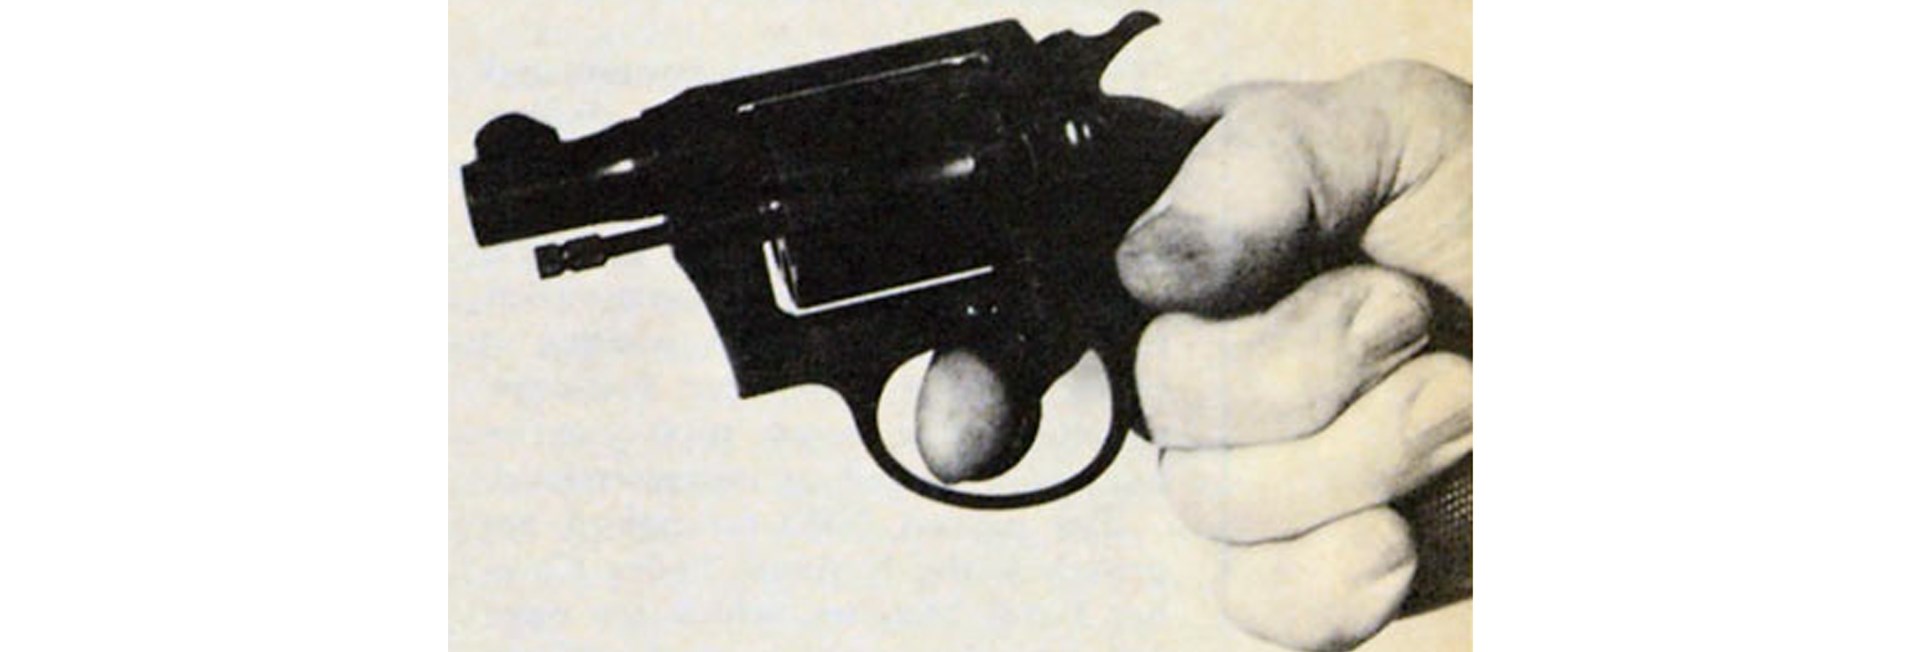 McGivern's hand demonstrates proper grip for double-action shooting with the revolver.